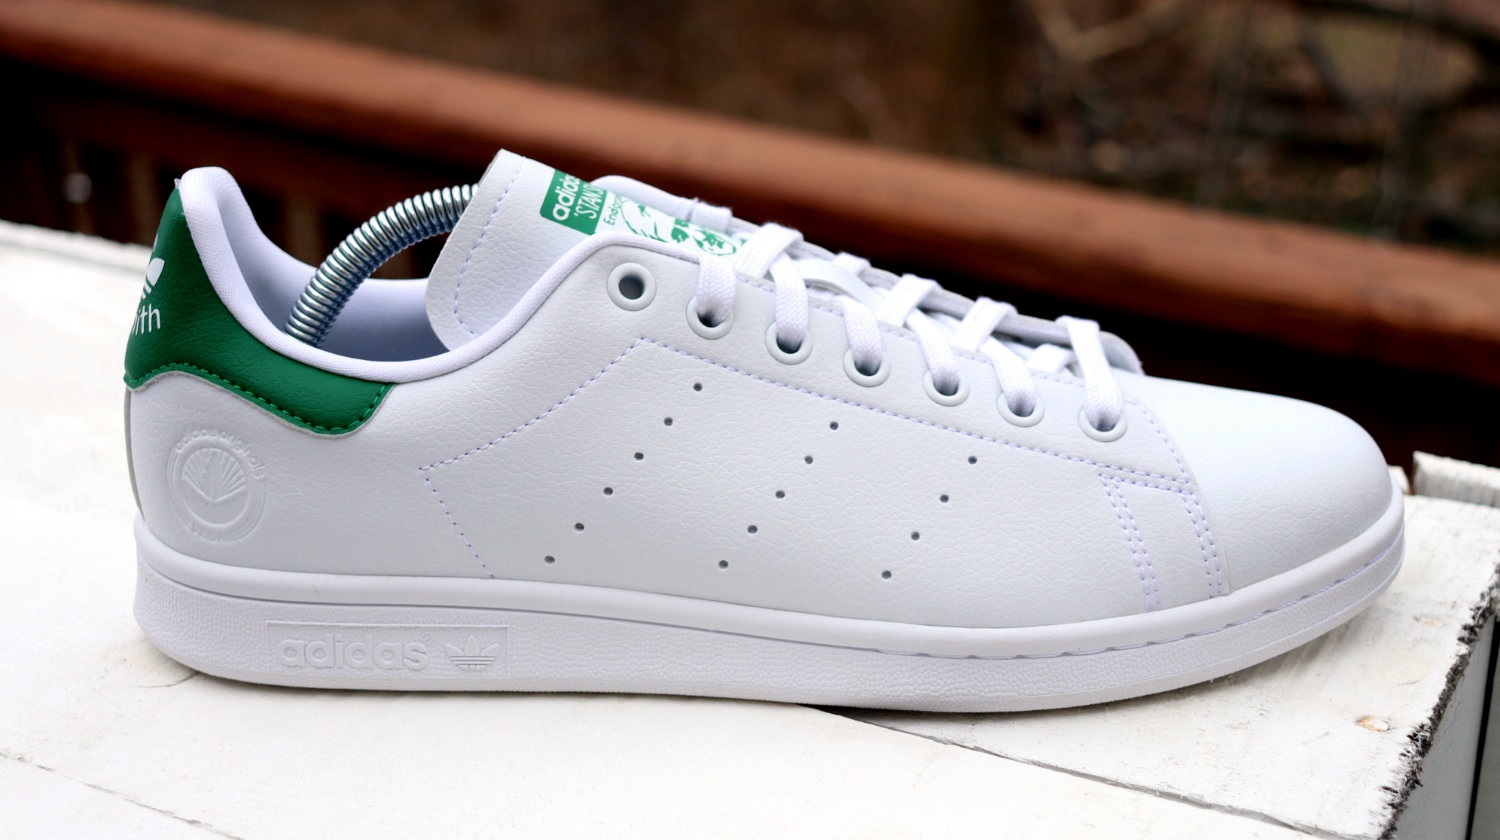 In Review: The Adidas Stan Smith Sneaker